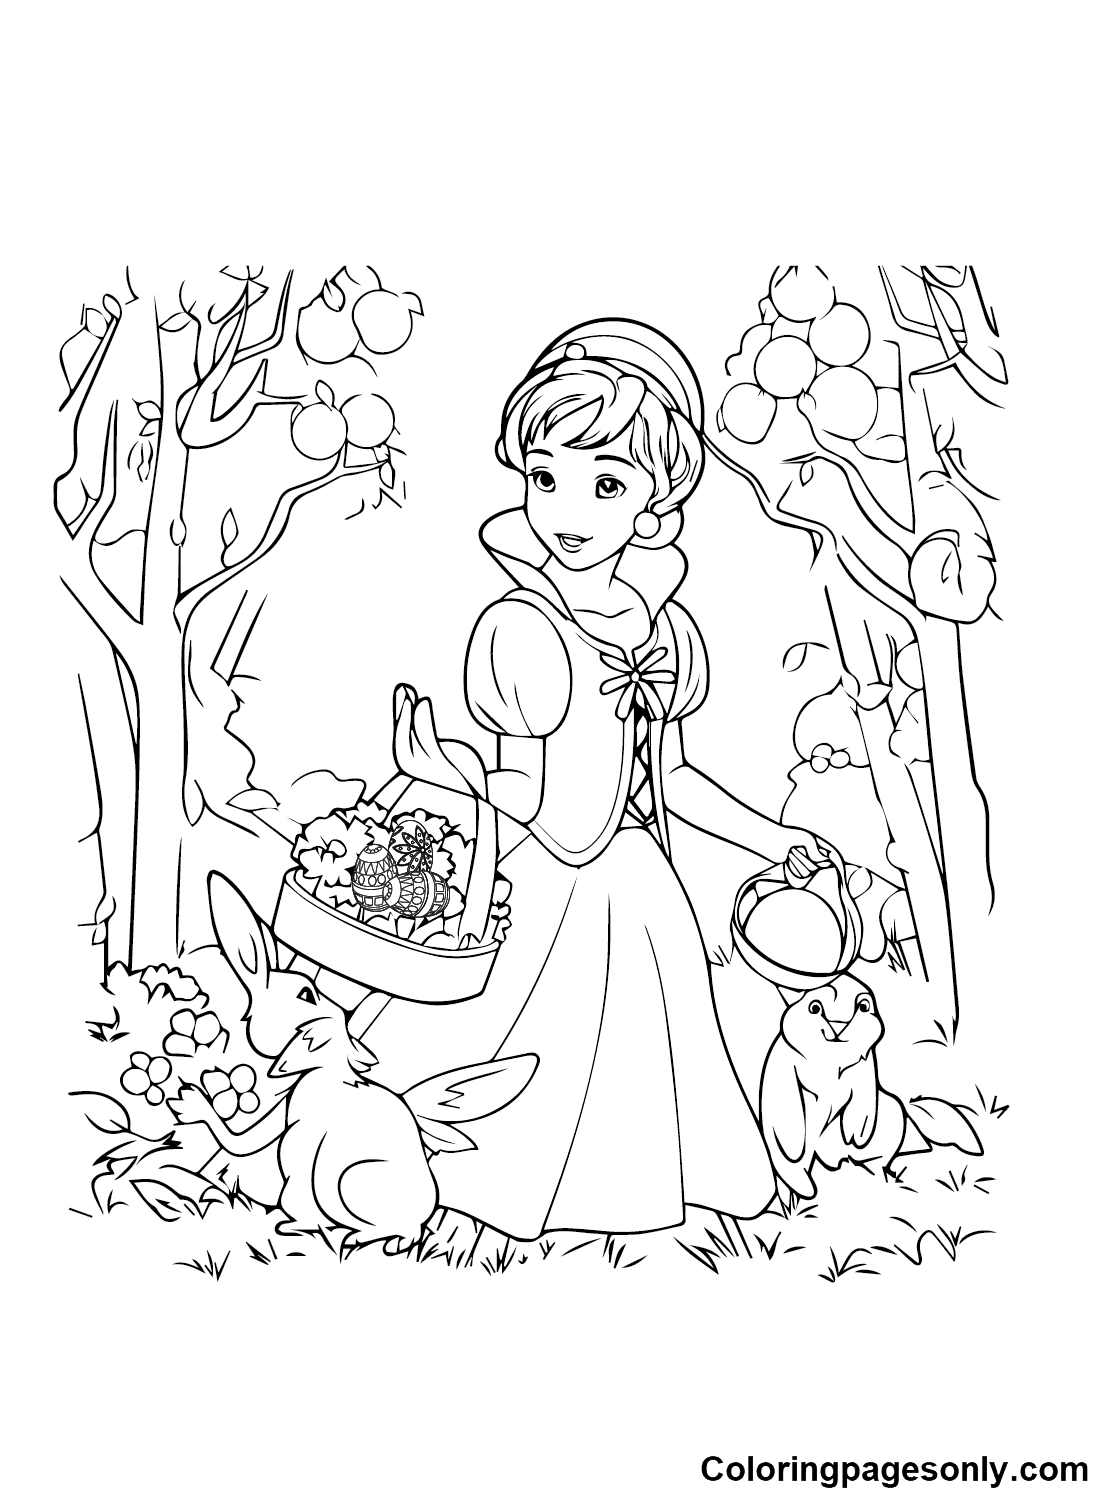 Easter Cartoon Images Coloring Page